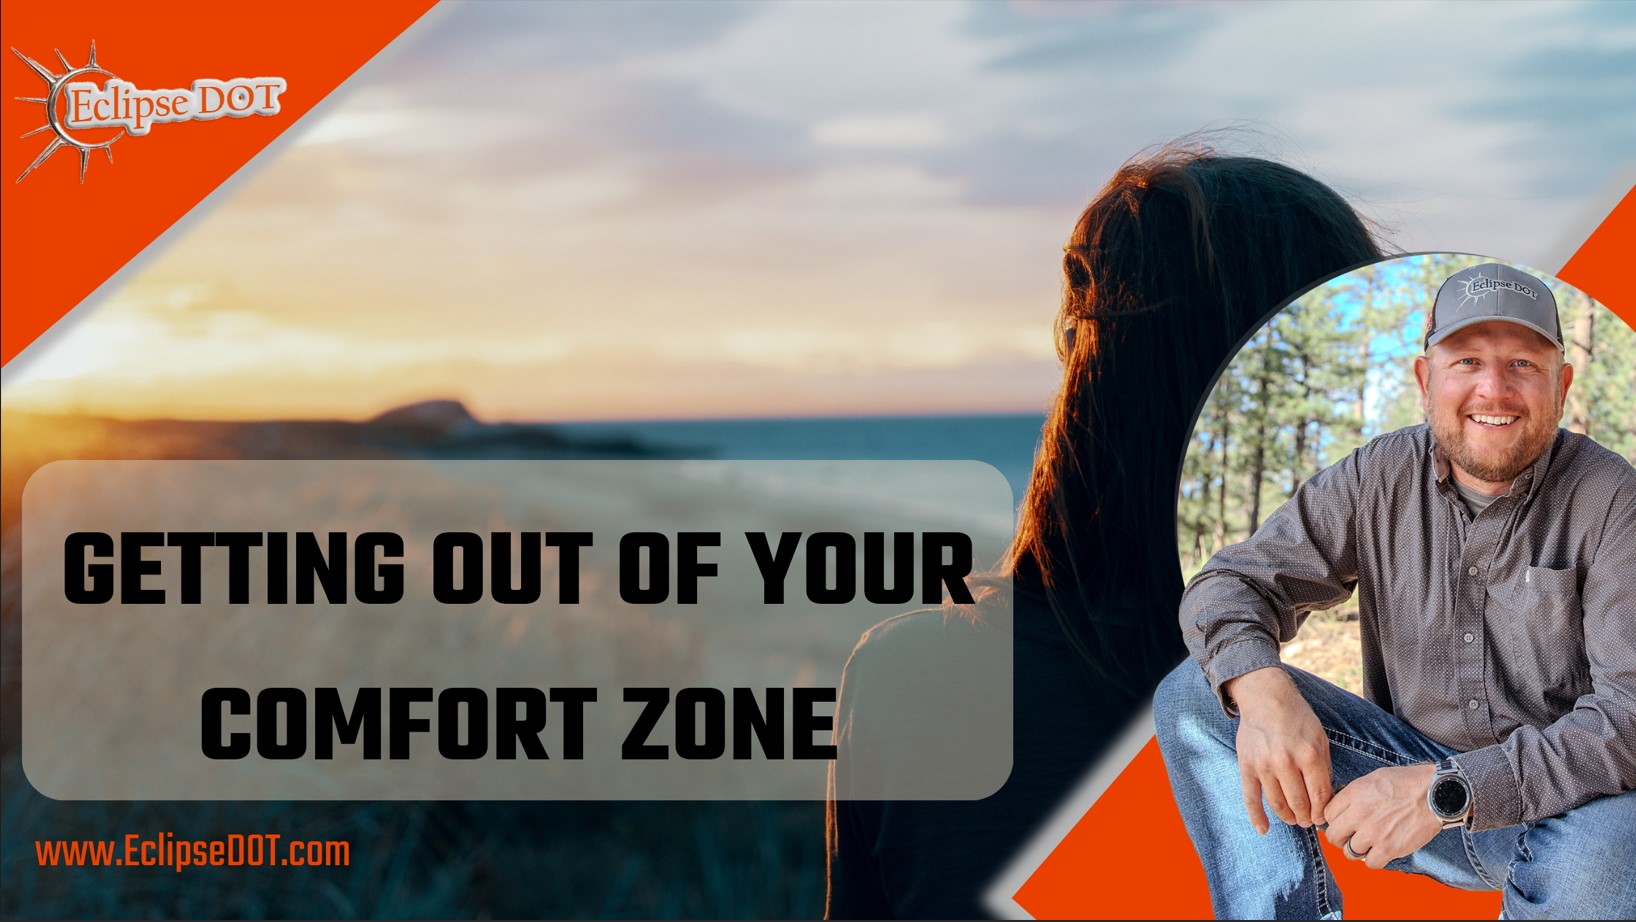 A person is stepping out of their comfort zone, symbolizing personal growth and challenge.